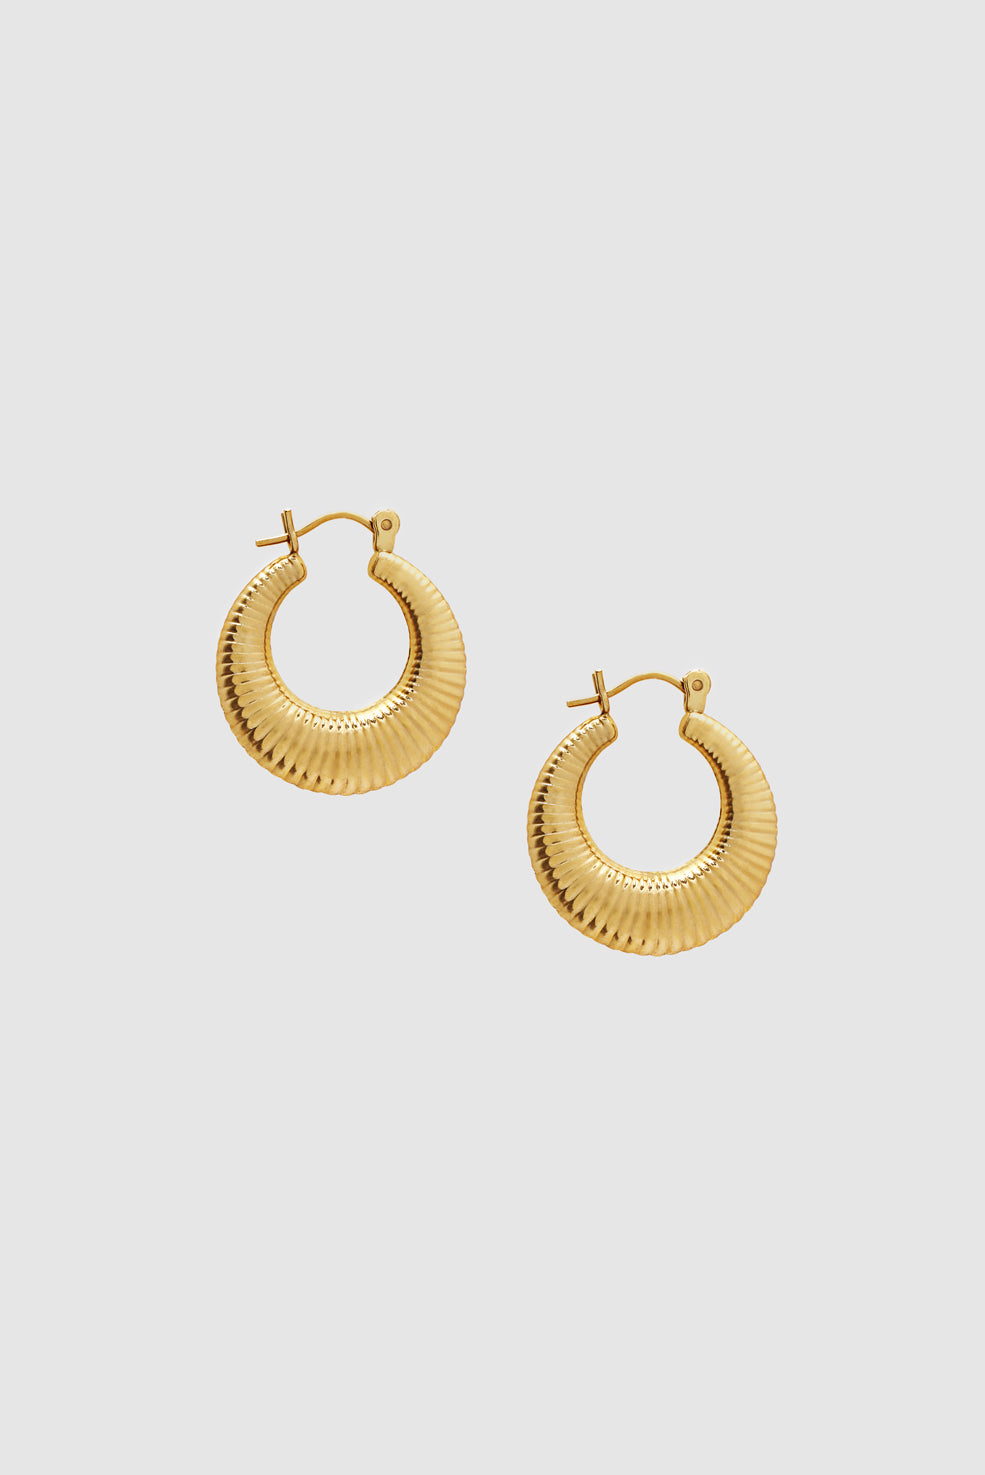 ANINE BING Chunky Coil Hoop Earrings - 14k Gold - Second Front View